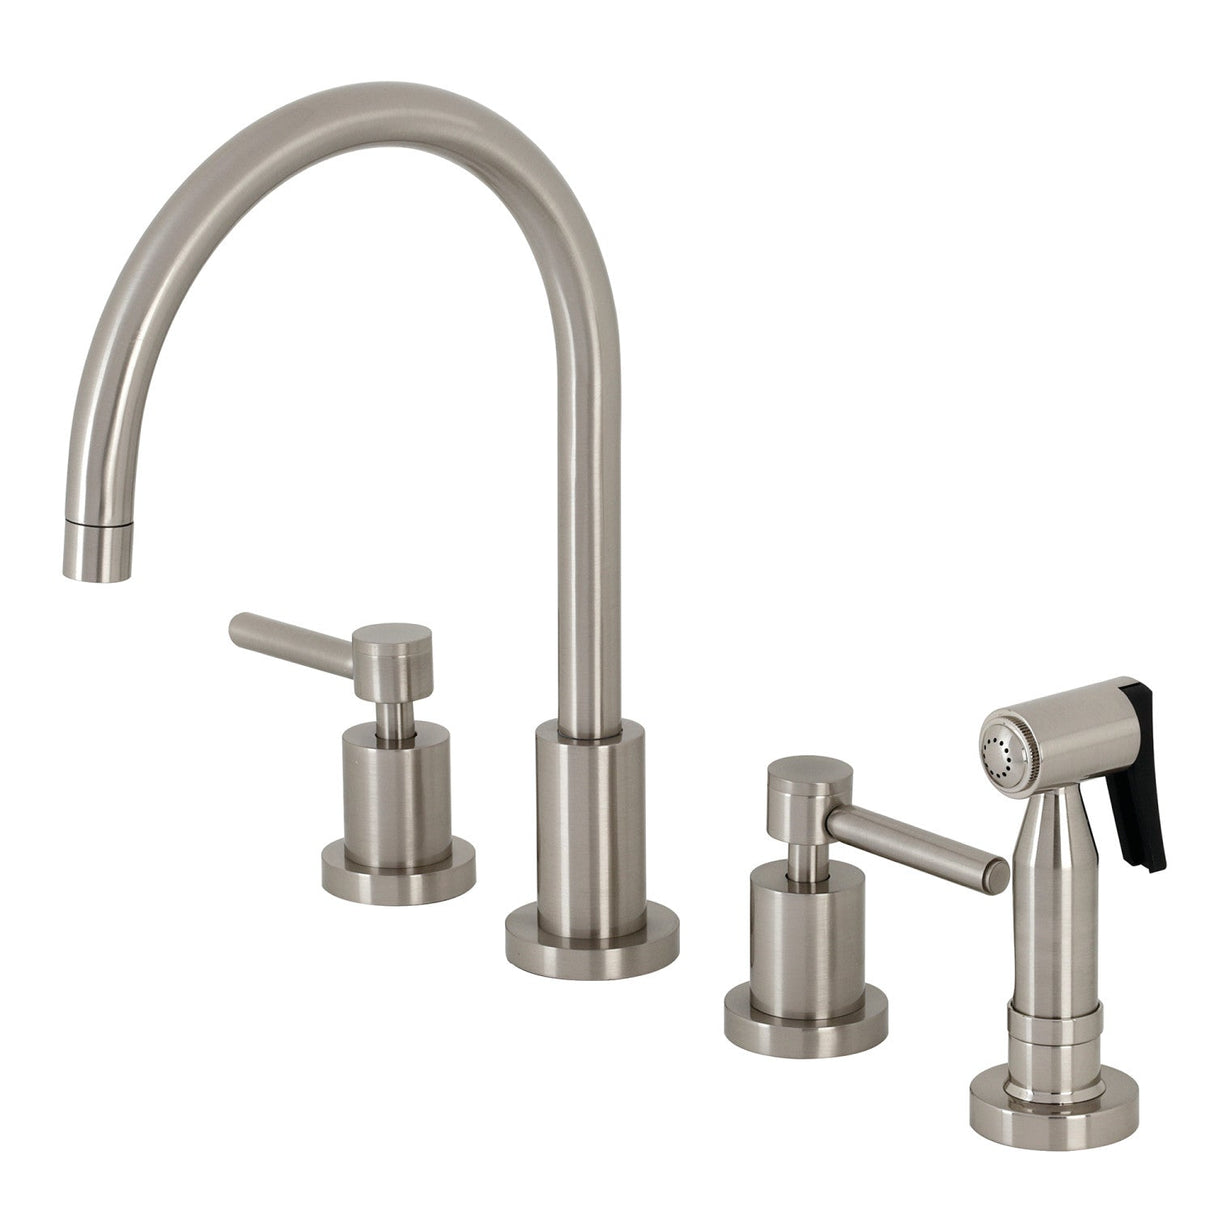 Concord KS8728DLBS Two-Handle 4-Hole Deck Mount Widespread Kitchen Faucet with Brass Sprayer, Brushed Nickel